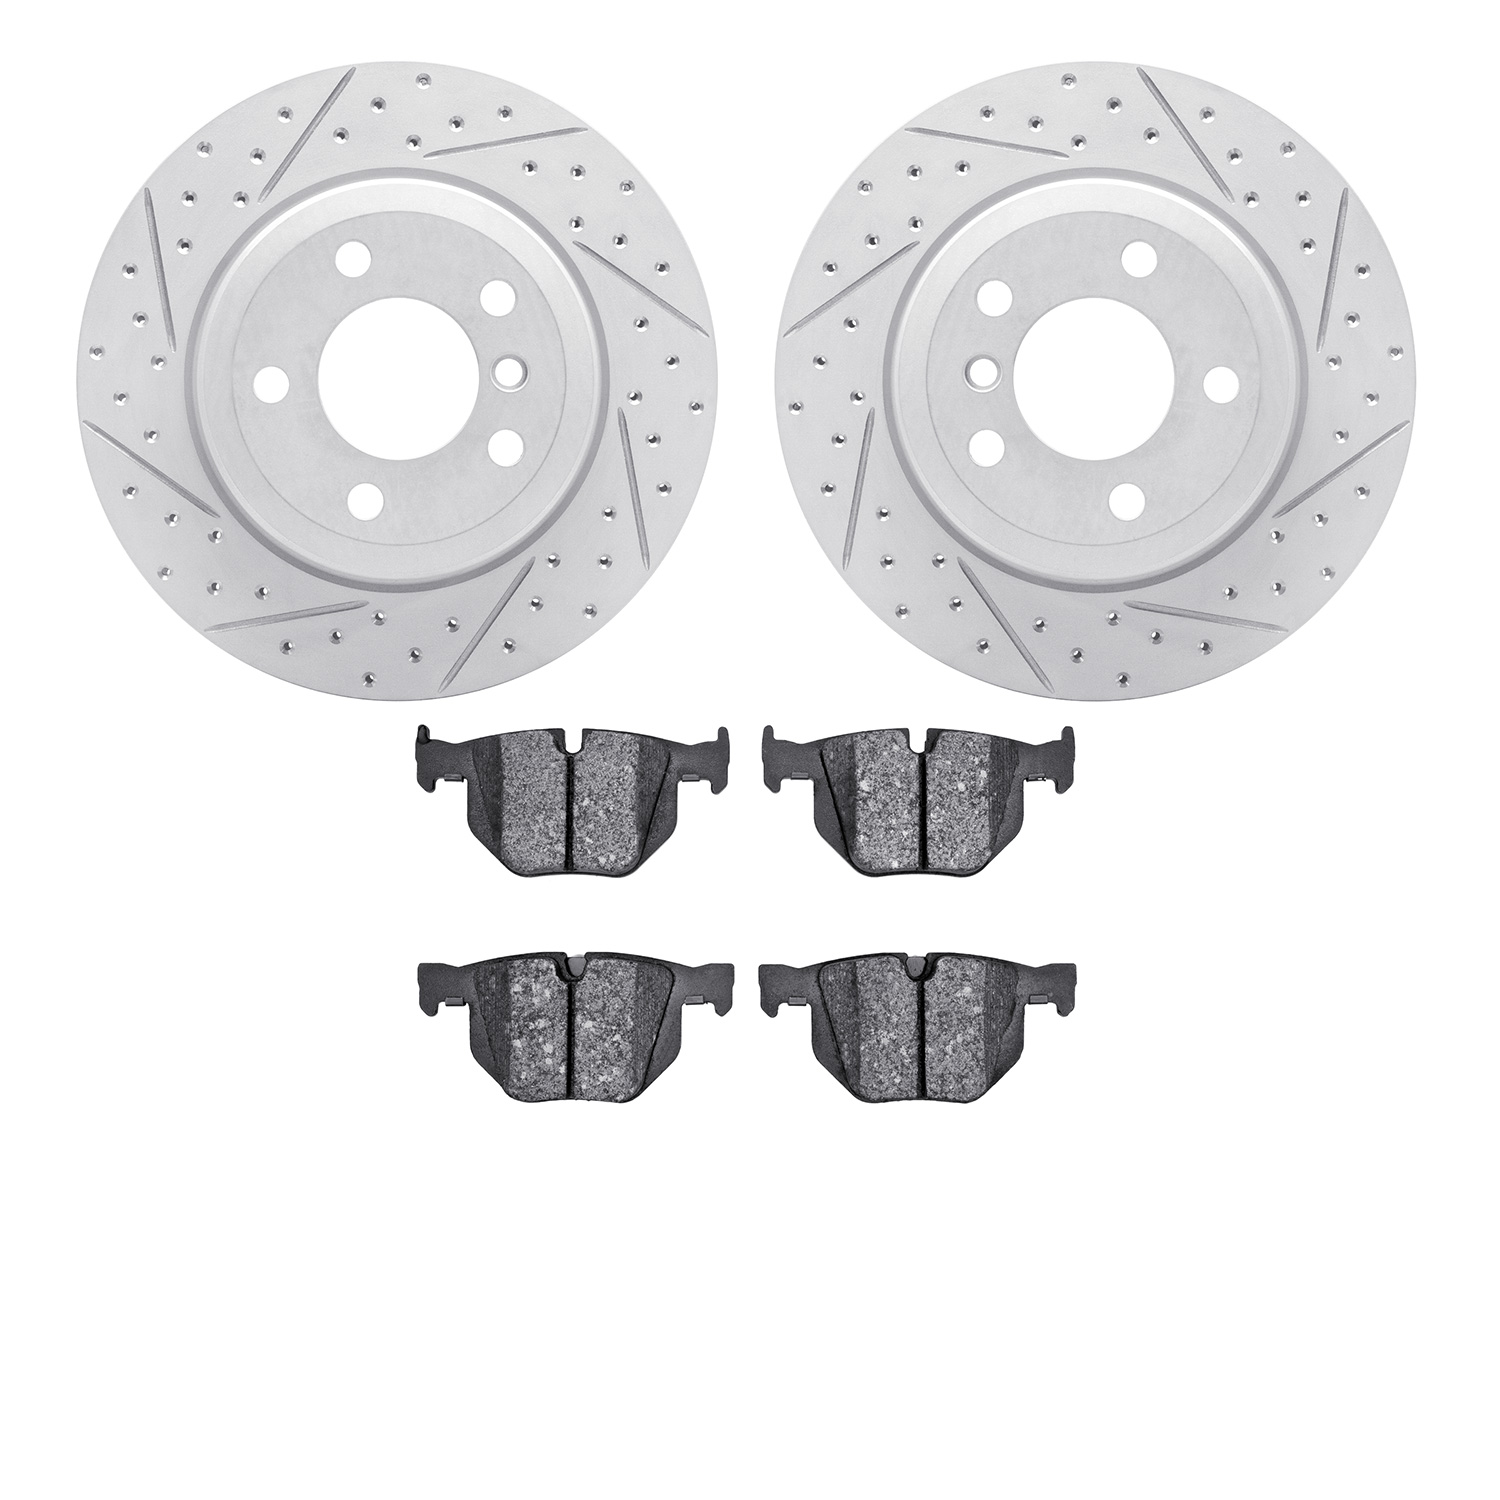 2502-31122 Geoperformance Drilled/Slotted Rotors w/5000 Advanced Brake Pads Kit, 2007-2014 BMW, Position: Rear